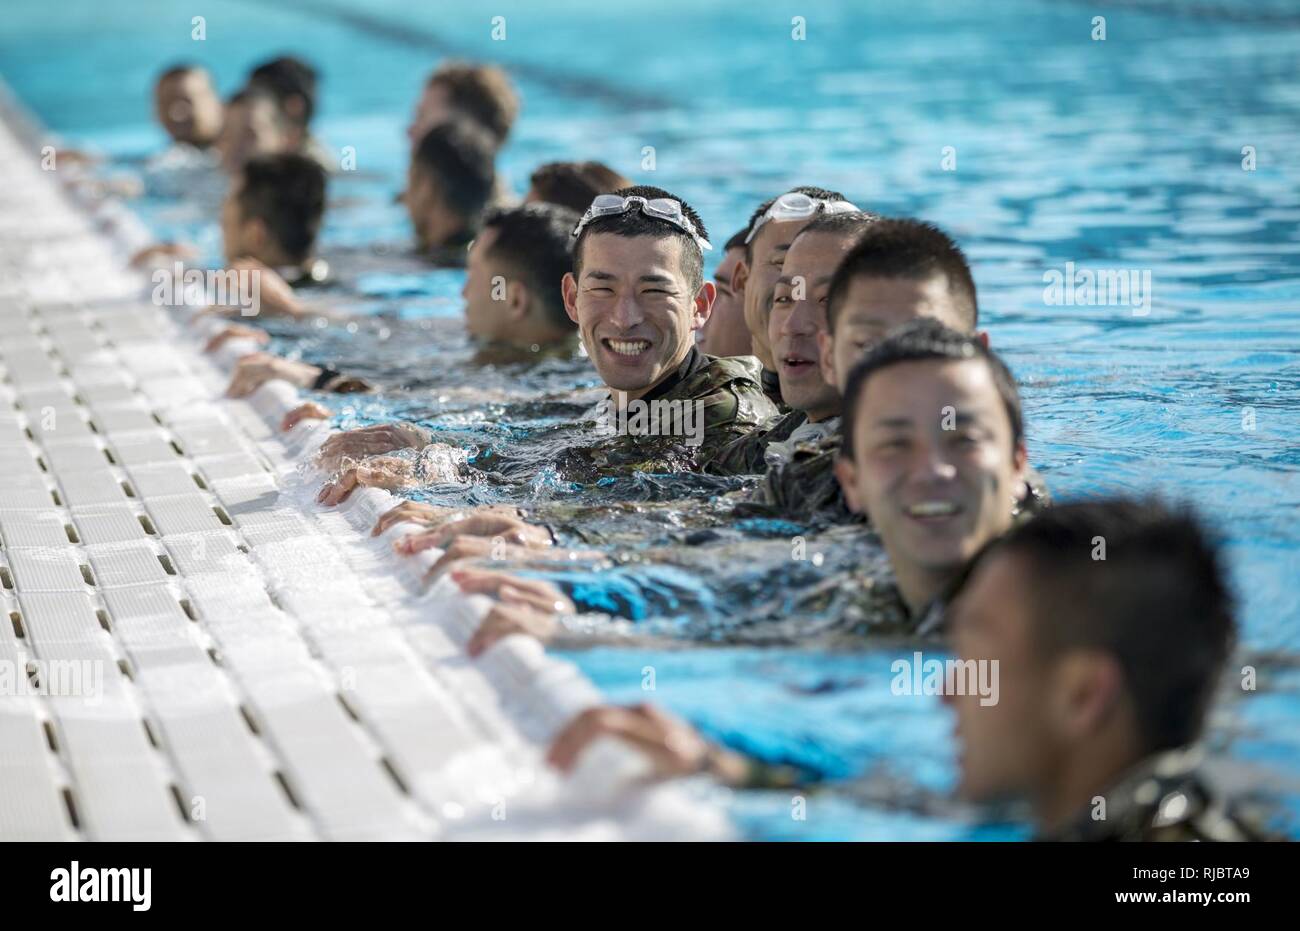 MARINE CORPS BASE CAMP PENDLETON, Calif. – Japan Ground Self Defense Force soldiers participate in a Marine Corps intermediate swim qualification as part of exercise Iron Fist Jan. 16, 2018. Iron Fist brings together U.S. Marines from the 11th Marine Expeditionary Unit and Soldiers from the Japan Ground Self Defense Force, Western Army Infantry Regiment, to improve bilateral planning, communicating, and conduct combined amphibious operations. Stock Photo